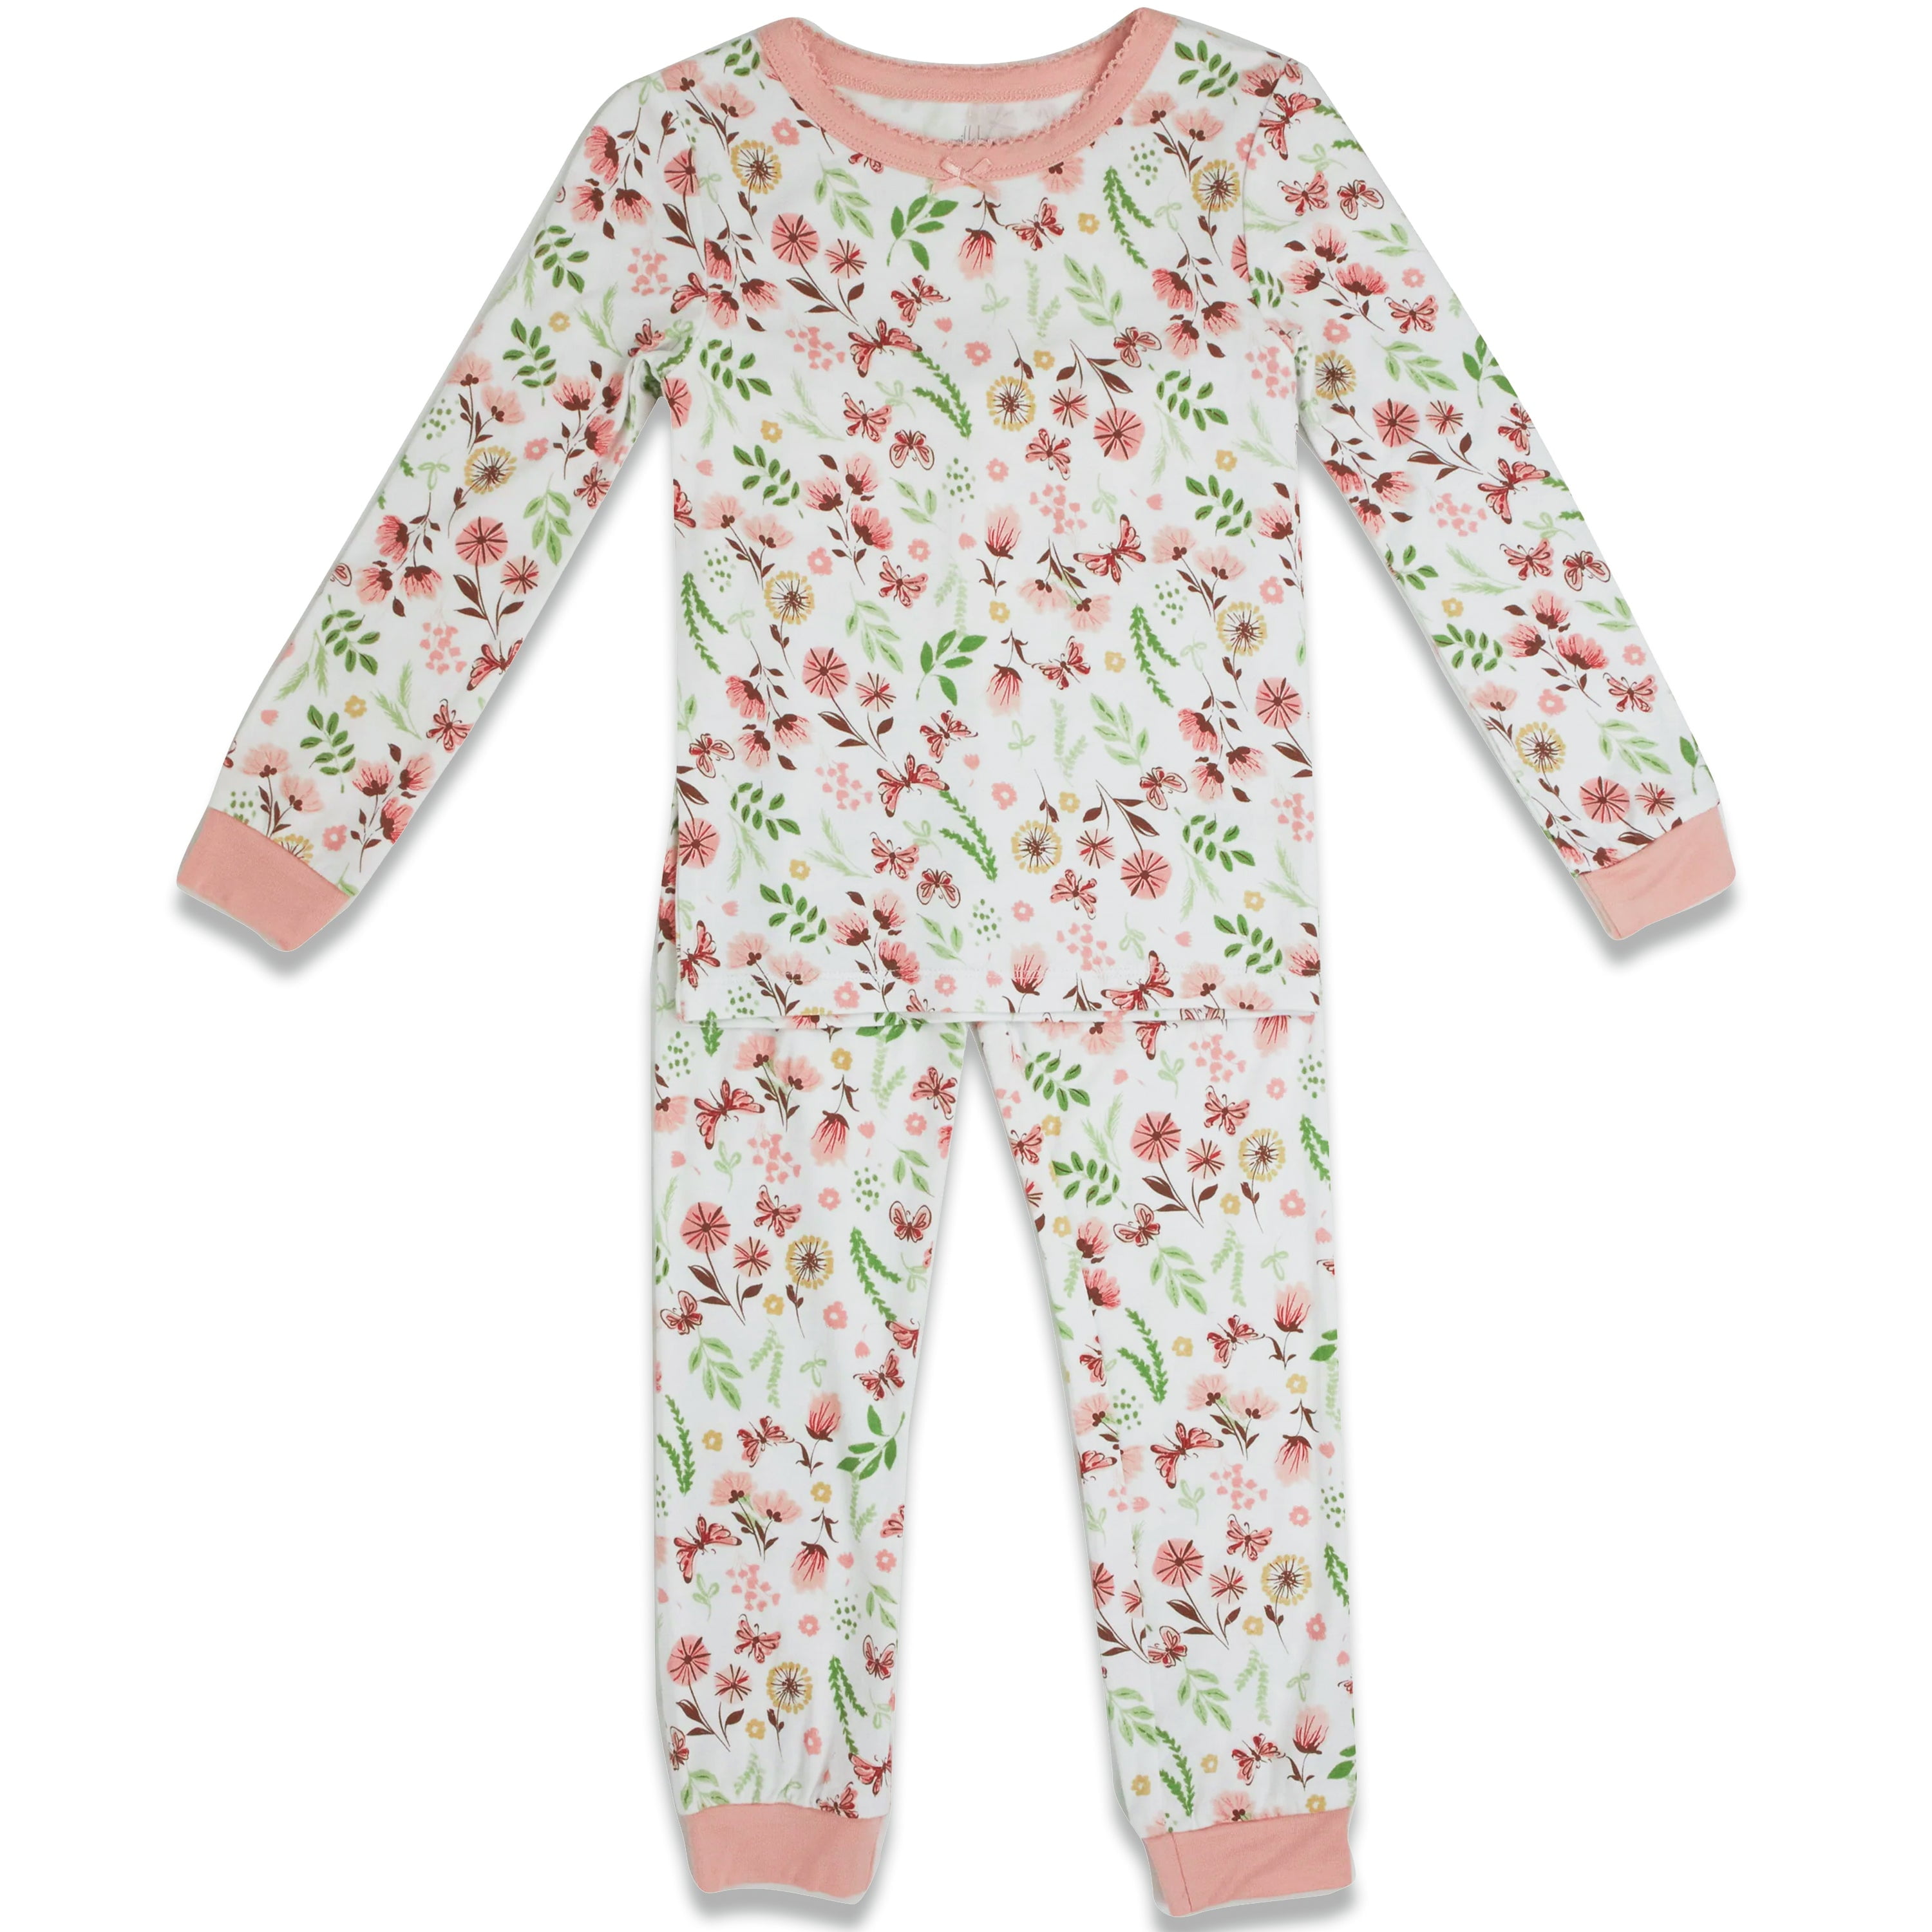 Milkberry Soft Bamboo Pajamas Toddler Pajama Set for Girls and Boys Sizes  2T-5T 